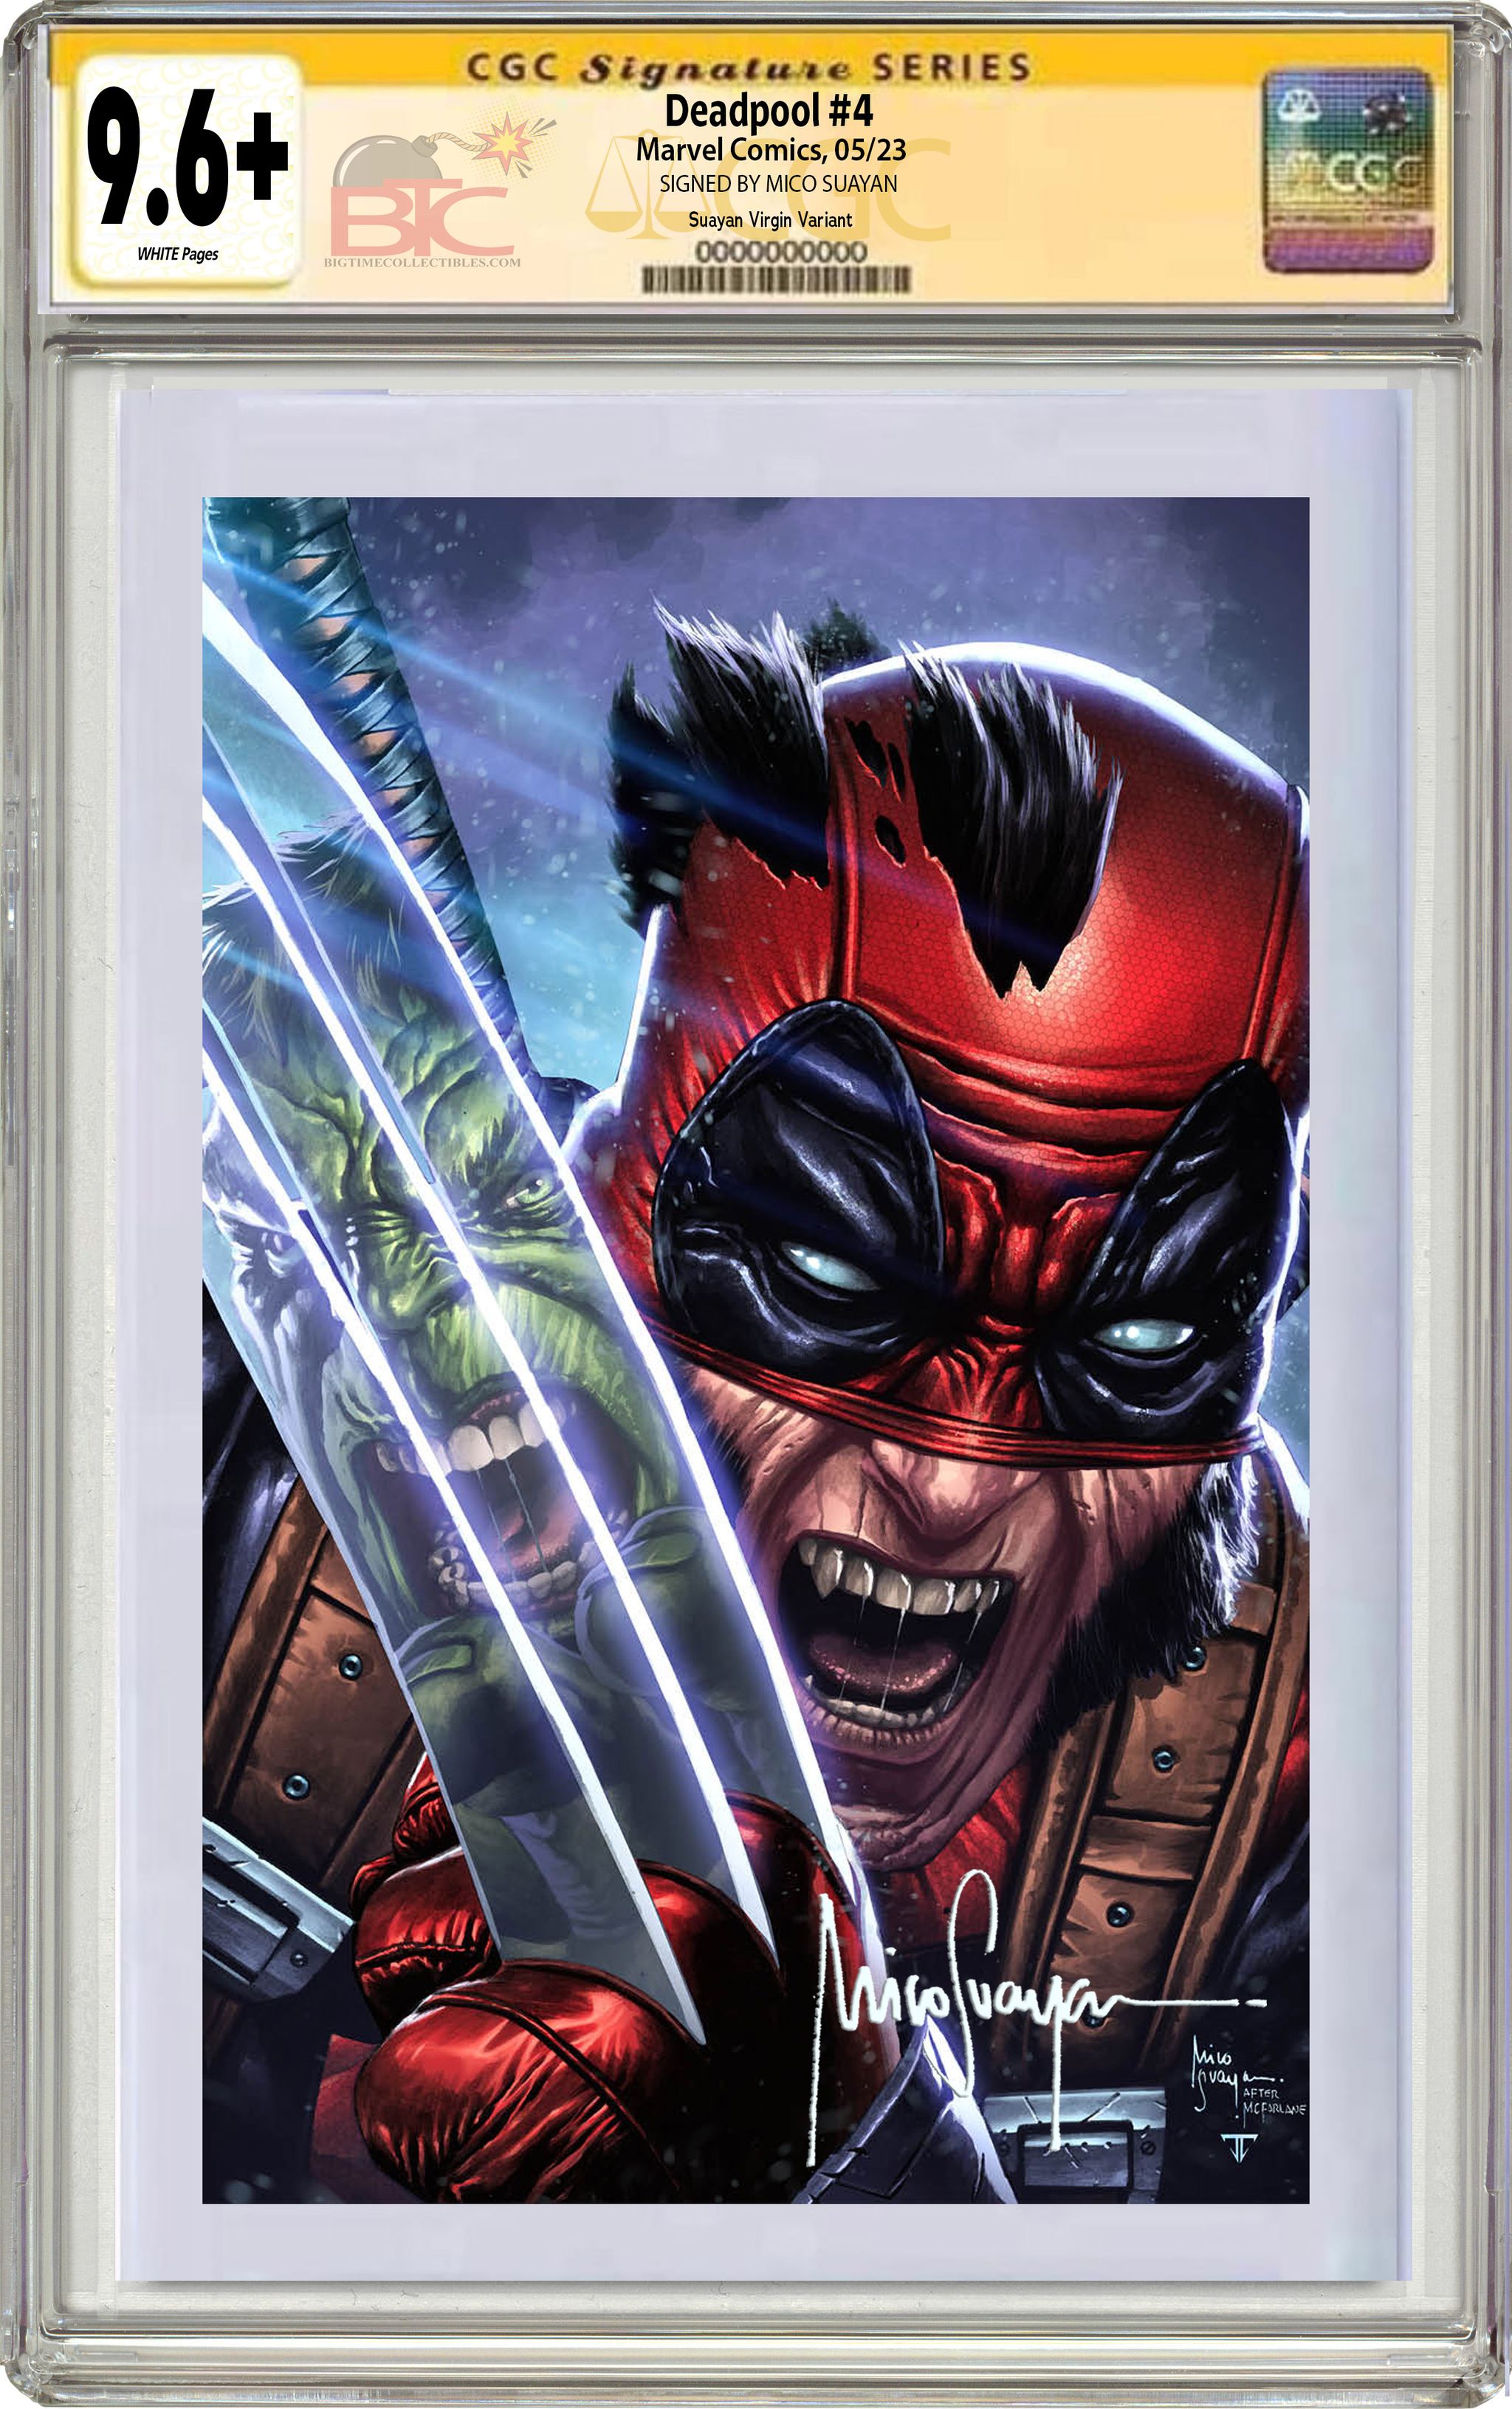 DEADPOOL #4 MICO SUAYAN EXCLUSIVE VARIANT COVERS